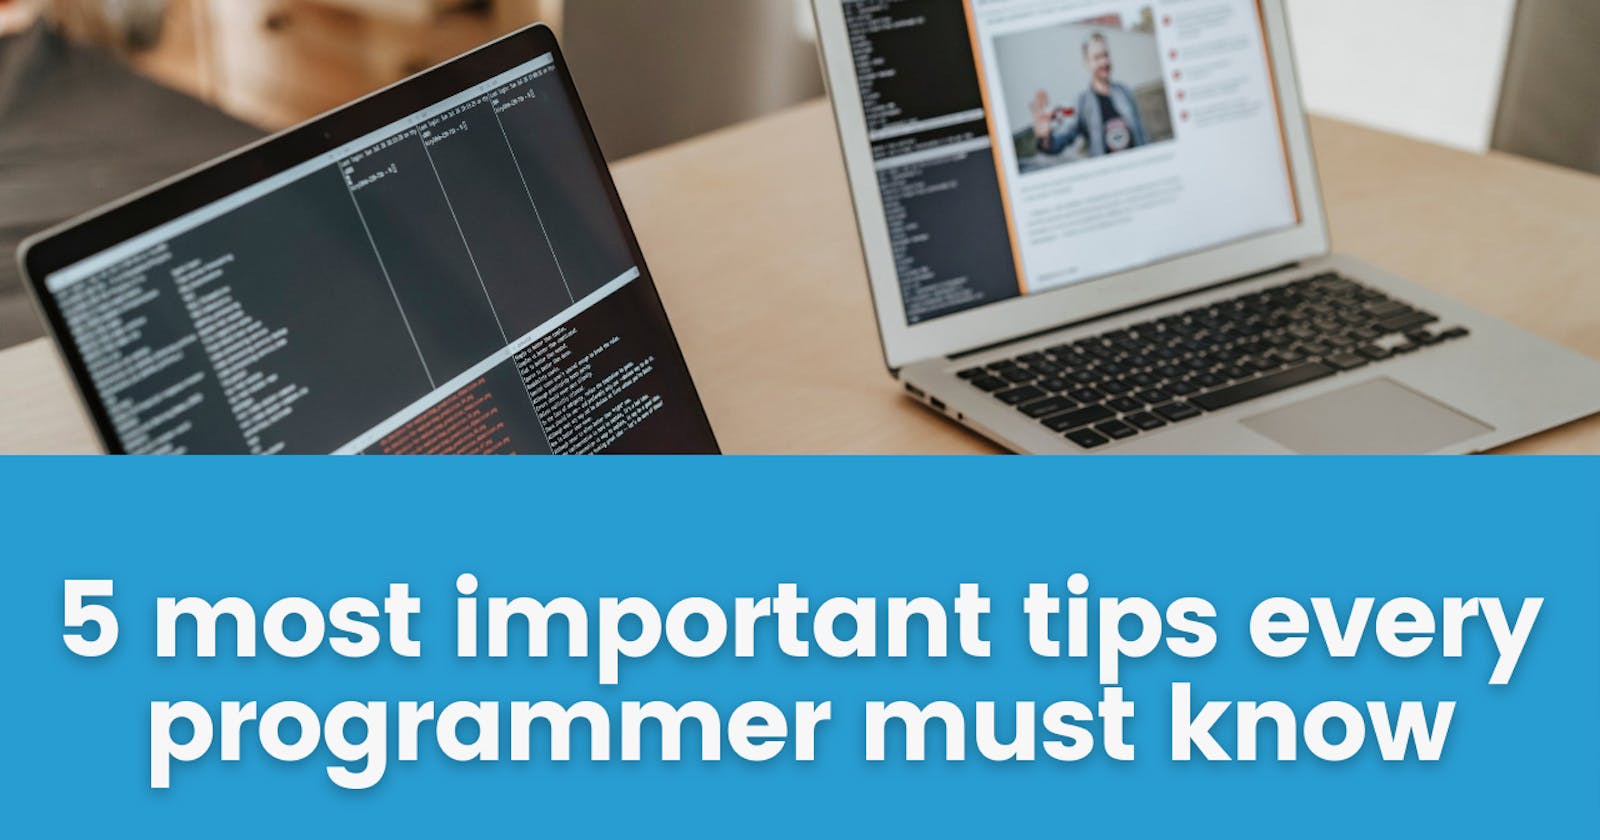 5 most important tips every programmer should know